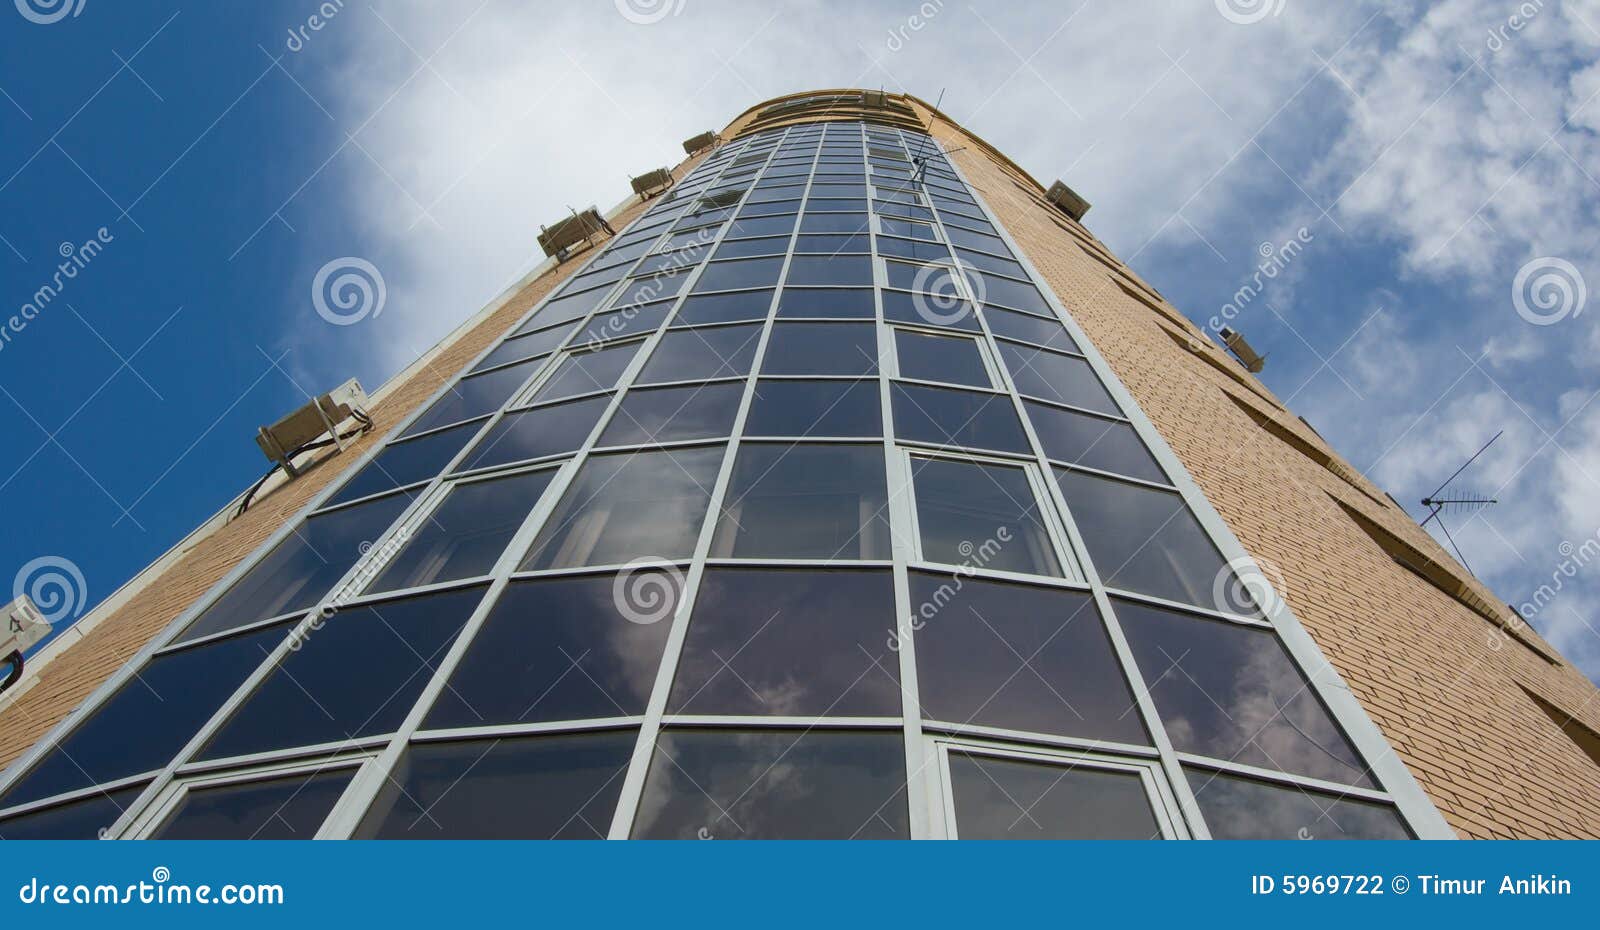 glass and yellow brick multistory tower house